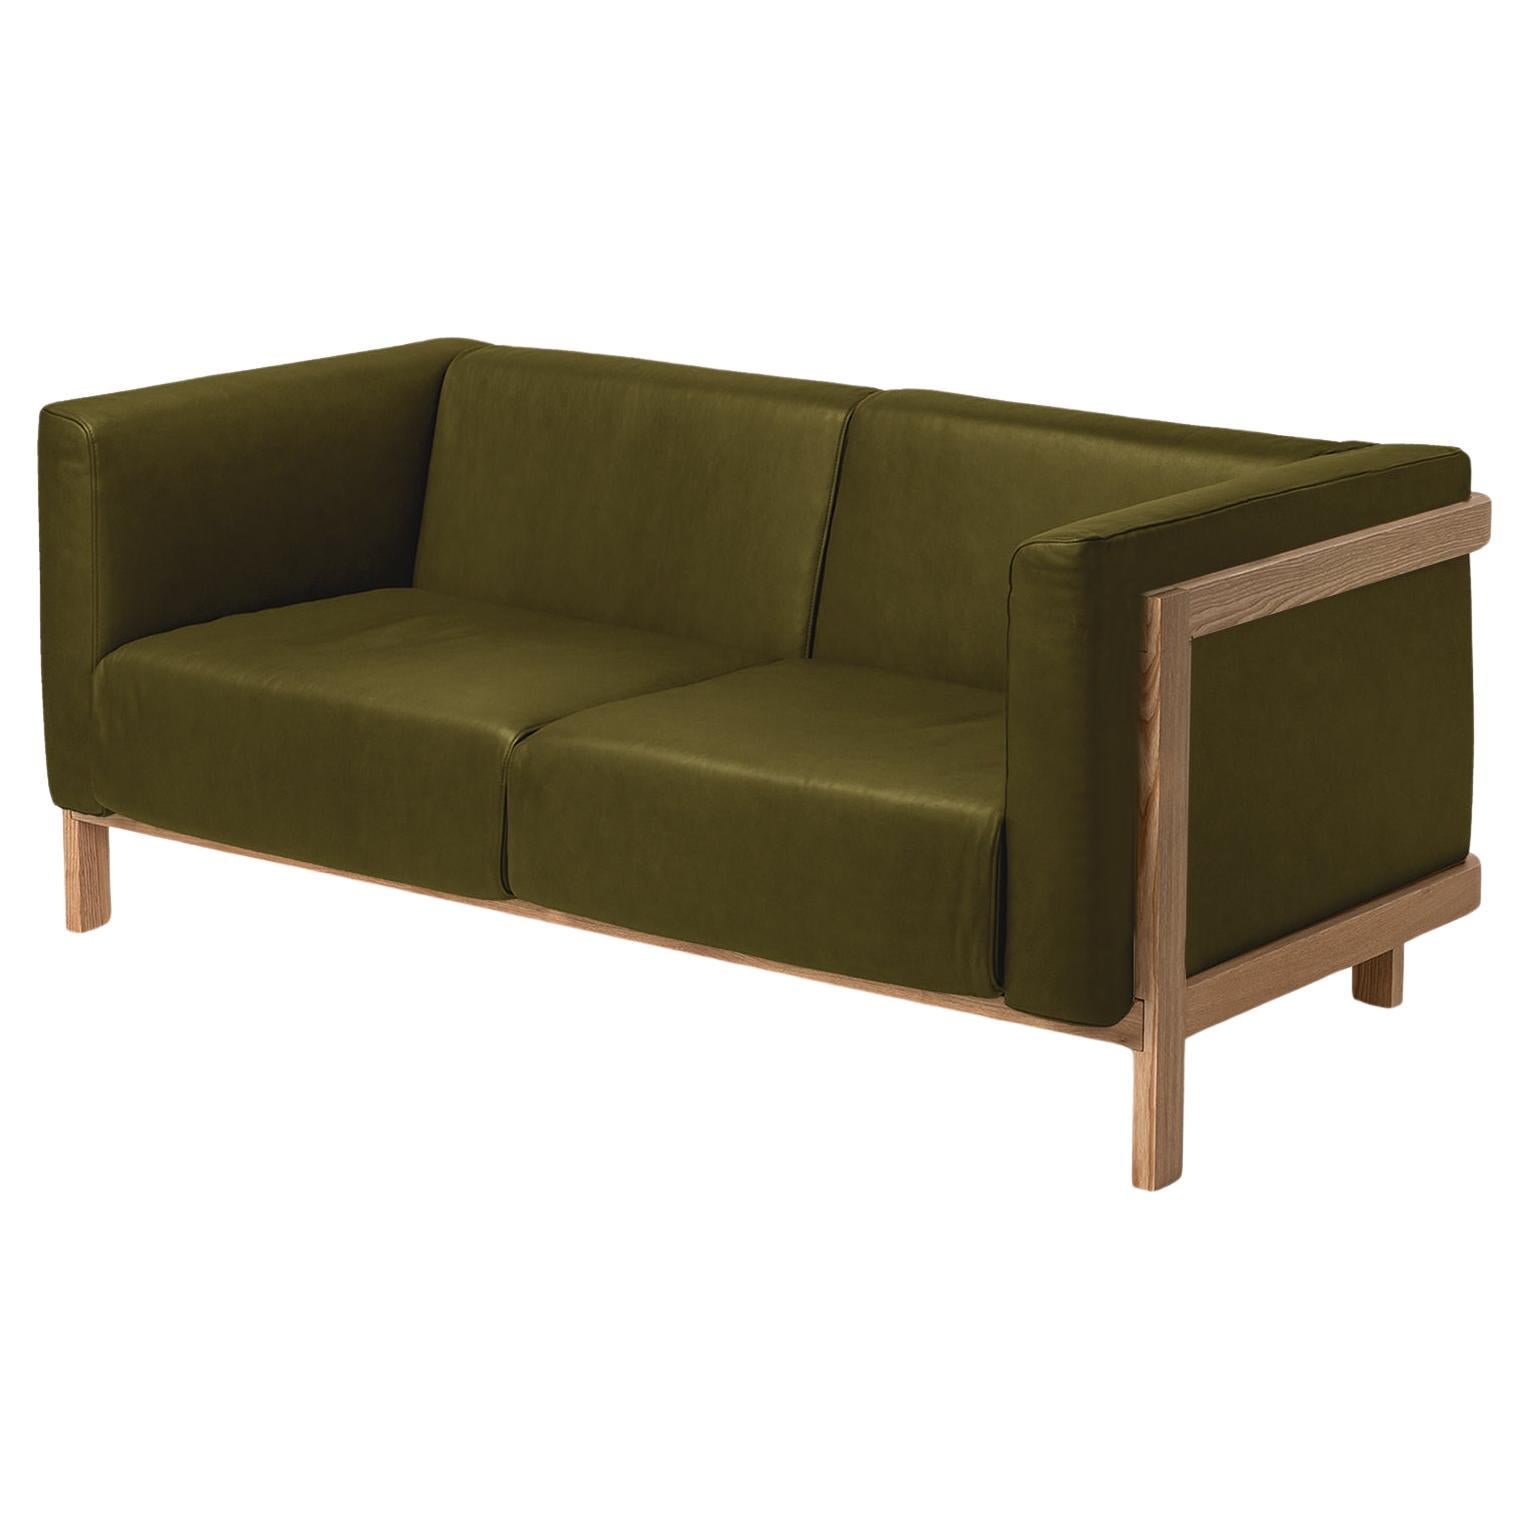 Minimalist two seater sofa ash - leather upholstered en vente